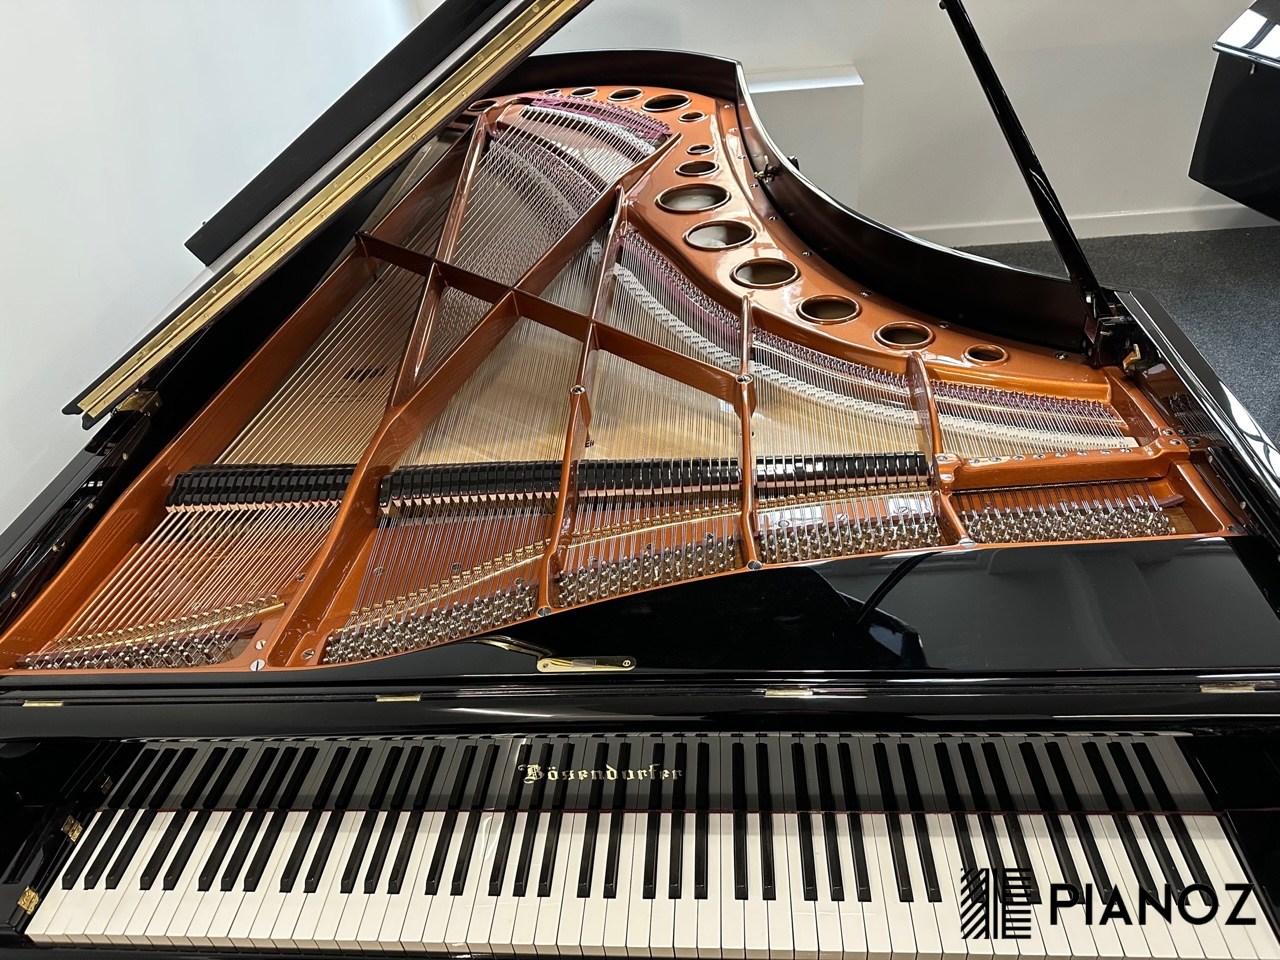 Bosendorfer 275 Imperial Line 92-Key Concert Grand piano for sale in UK